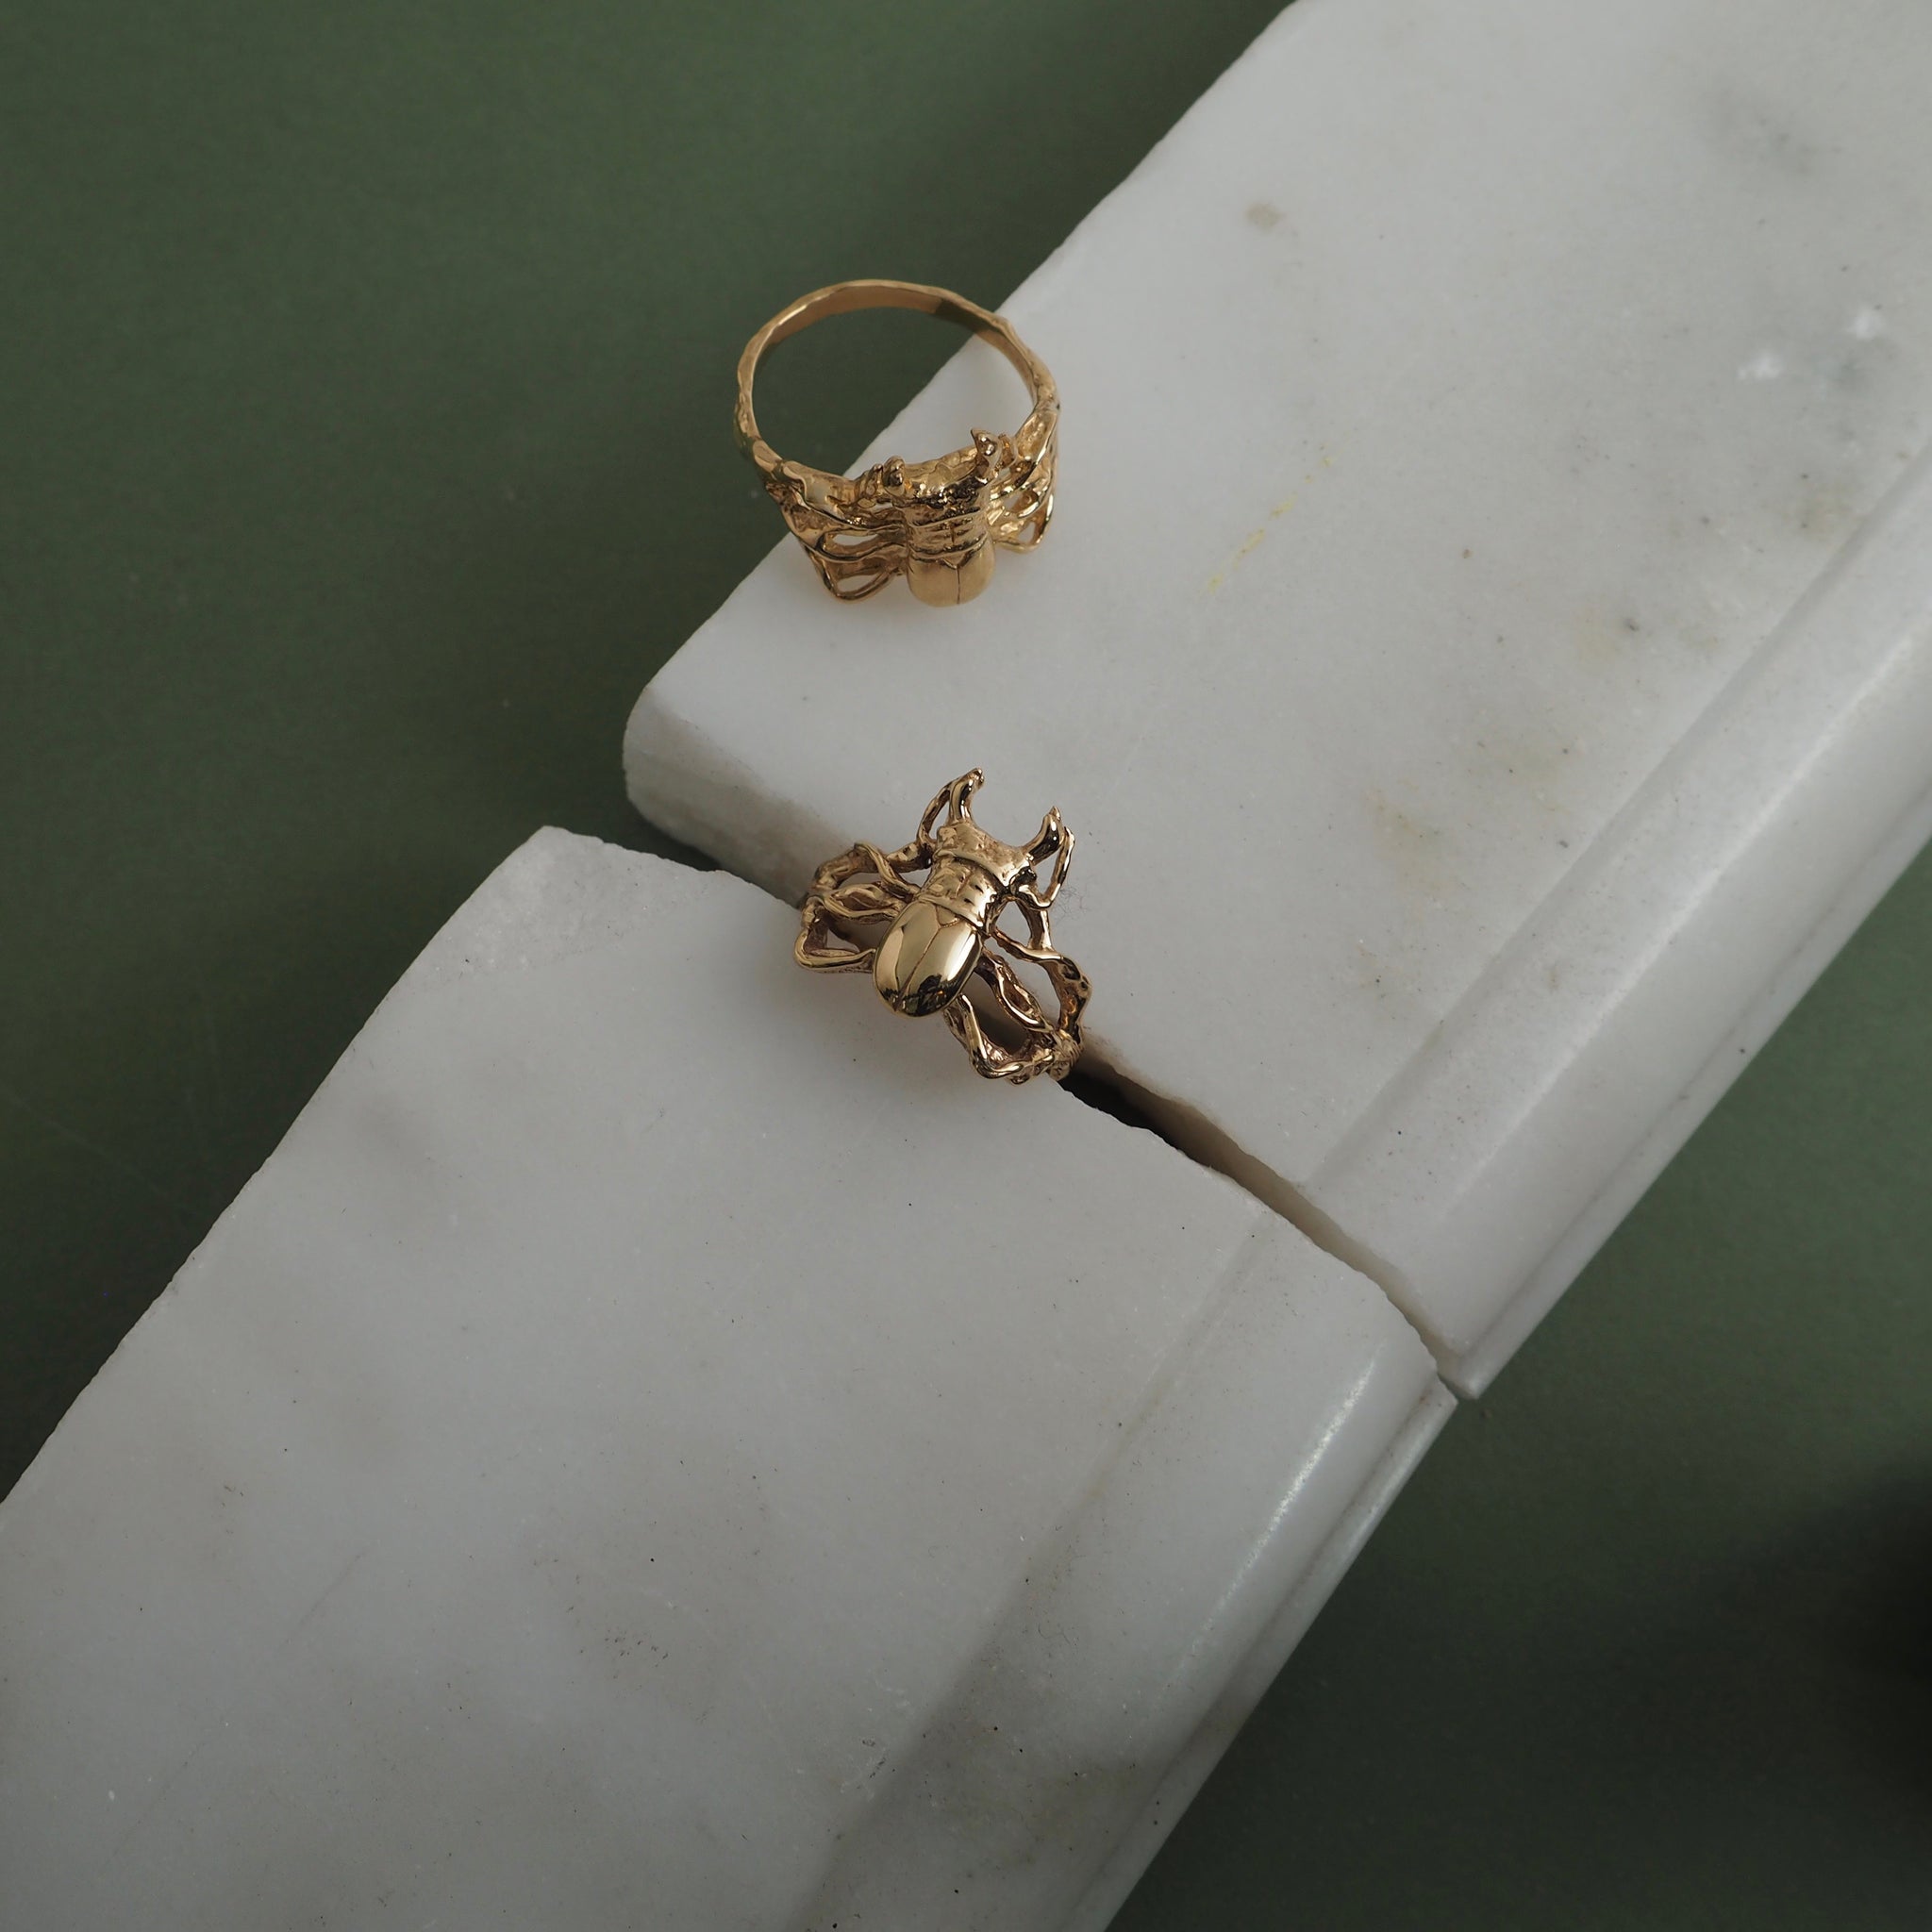 9ct Gold Little Stag Beetle Ring by Yasmin Everley